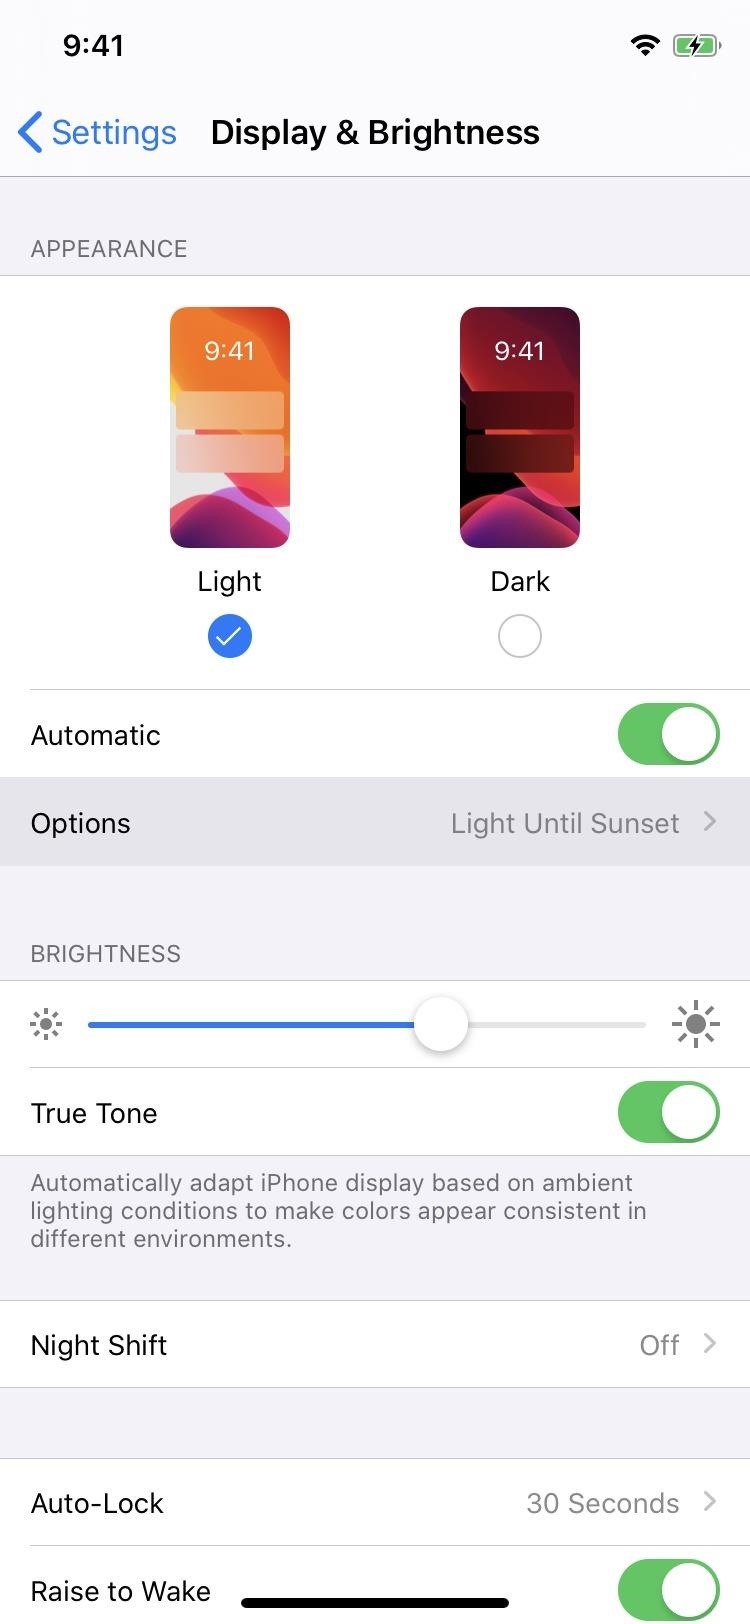 How to Enable Apple's True Dark Mode in iOS 13 for iPhone